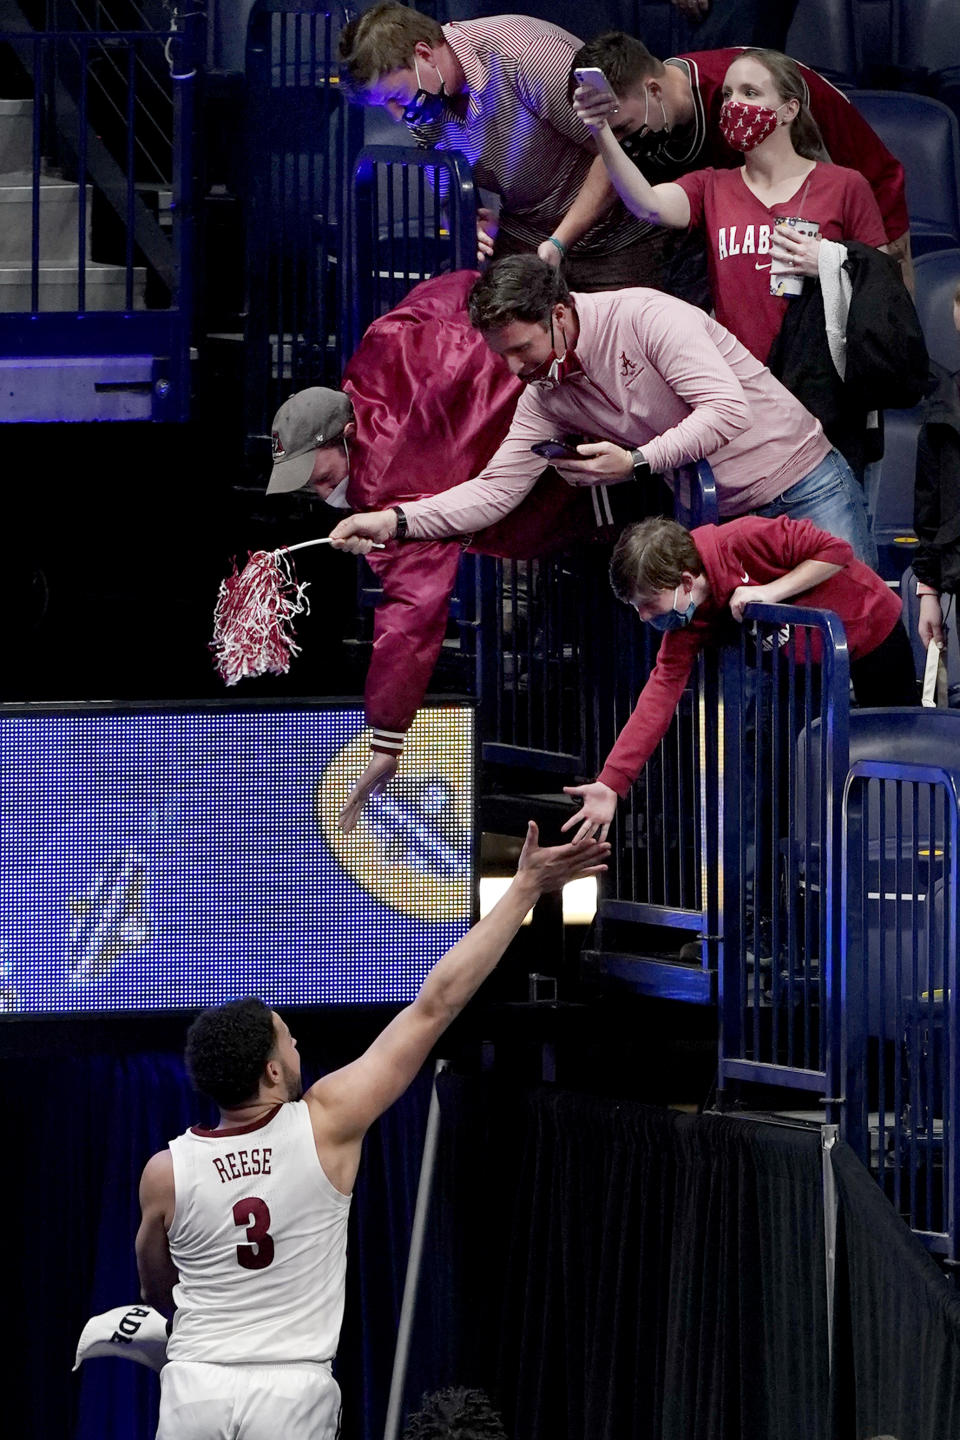 Alabama's Alex Reese (3) jumps up to slap hands with fans as he leaves the court after Alabama beat Tennessee in an NCAA college basketball game in the Southeastern Conference Tournament Saturday, March 13, 2021, in Nashville, Tenn. (AP Photo/Mark Humphrey)